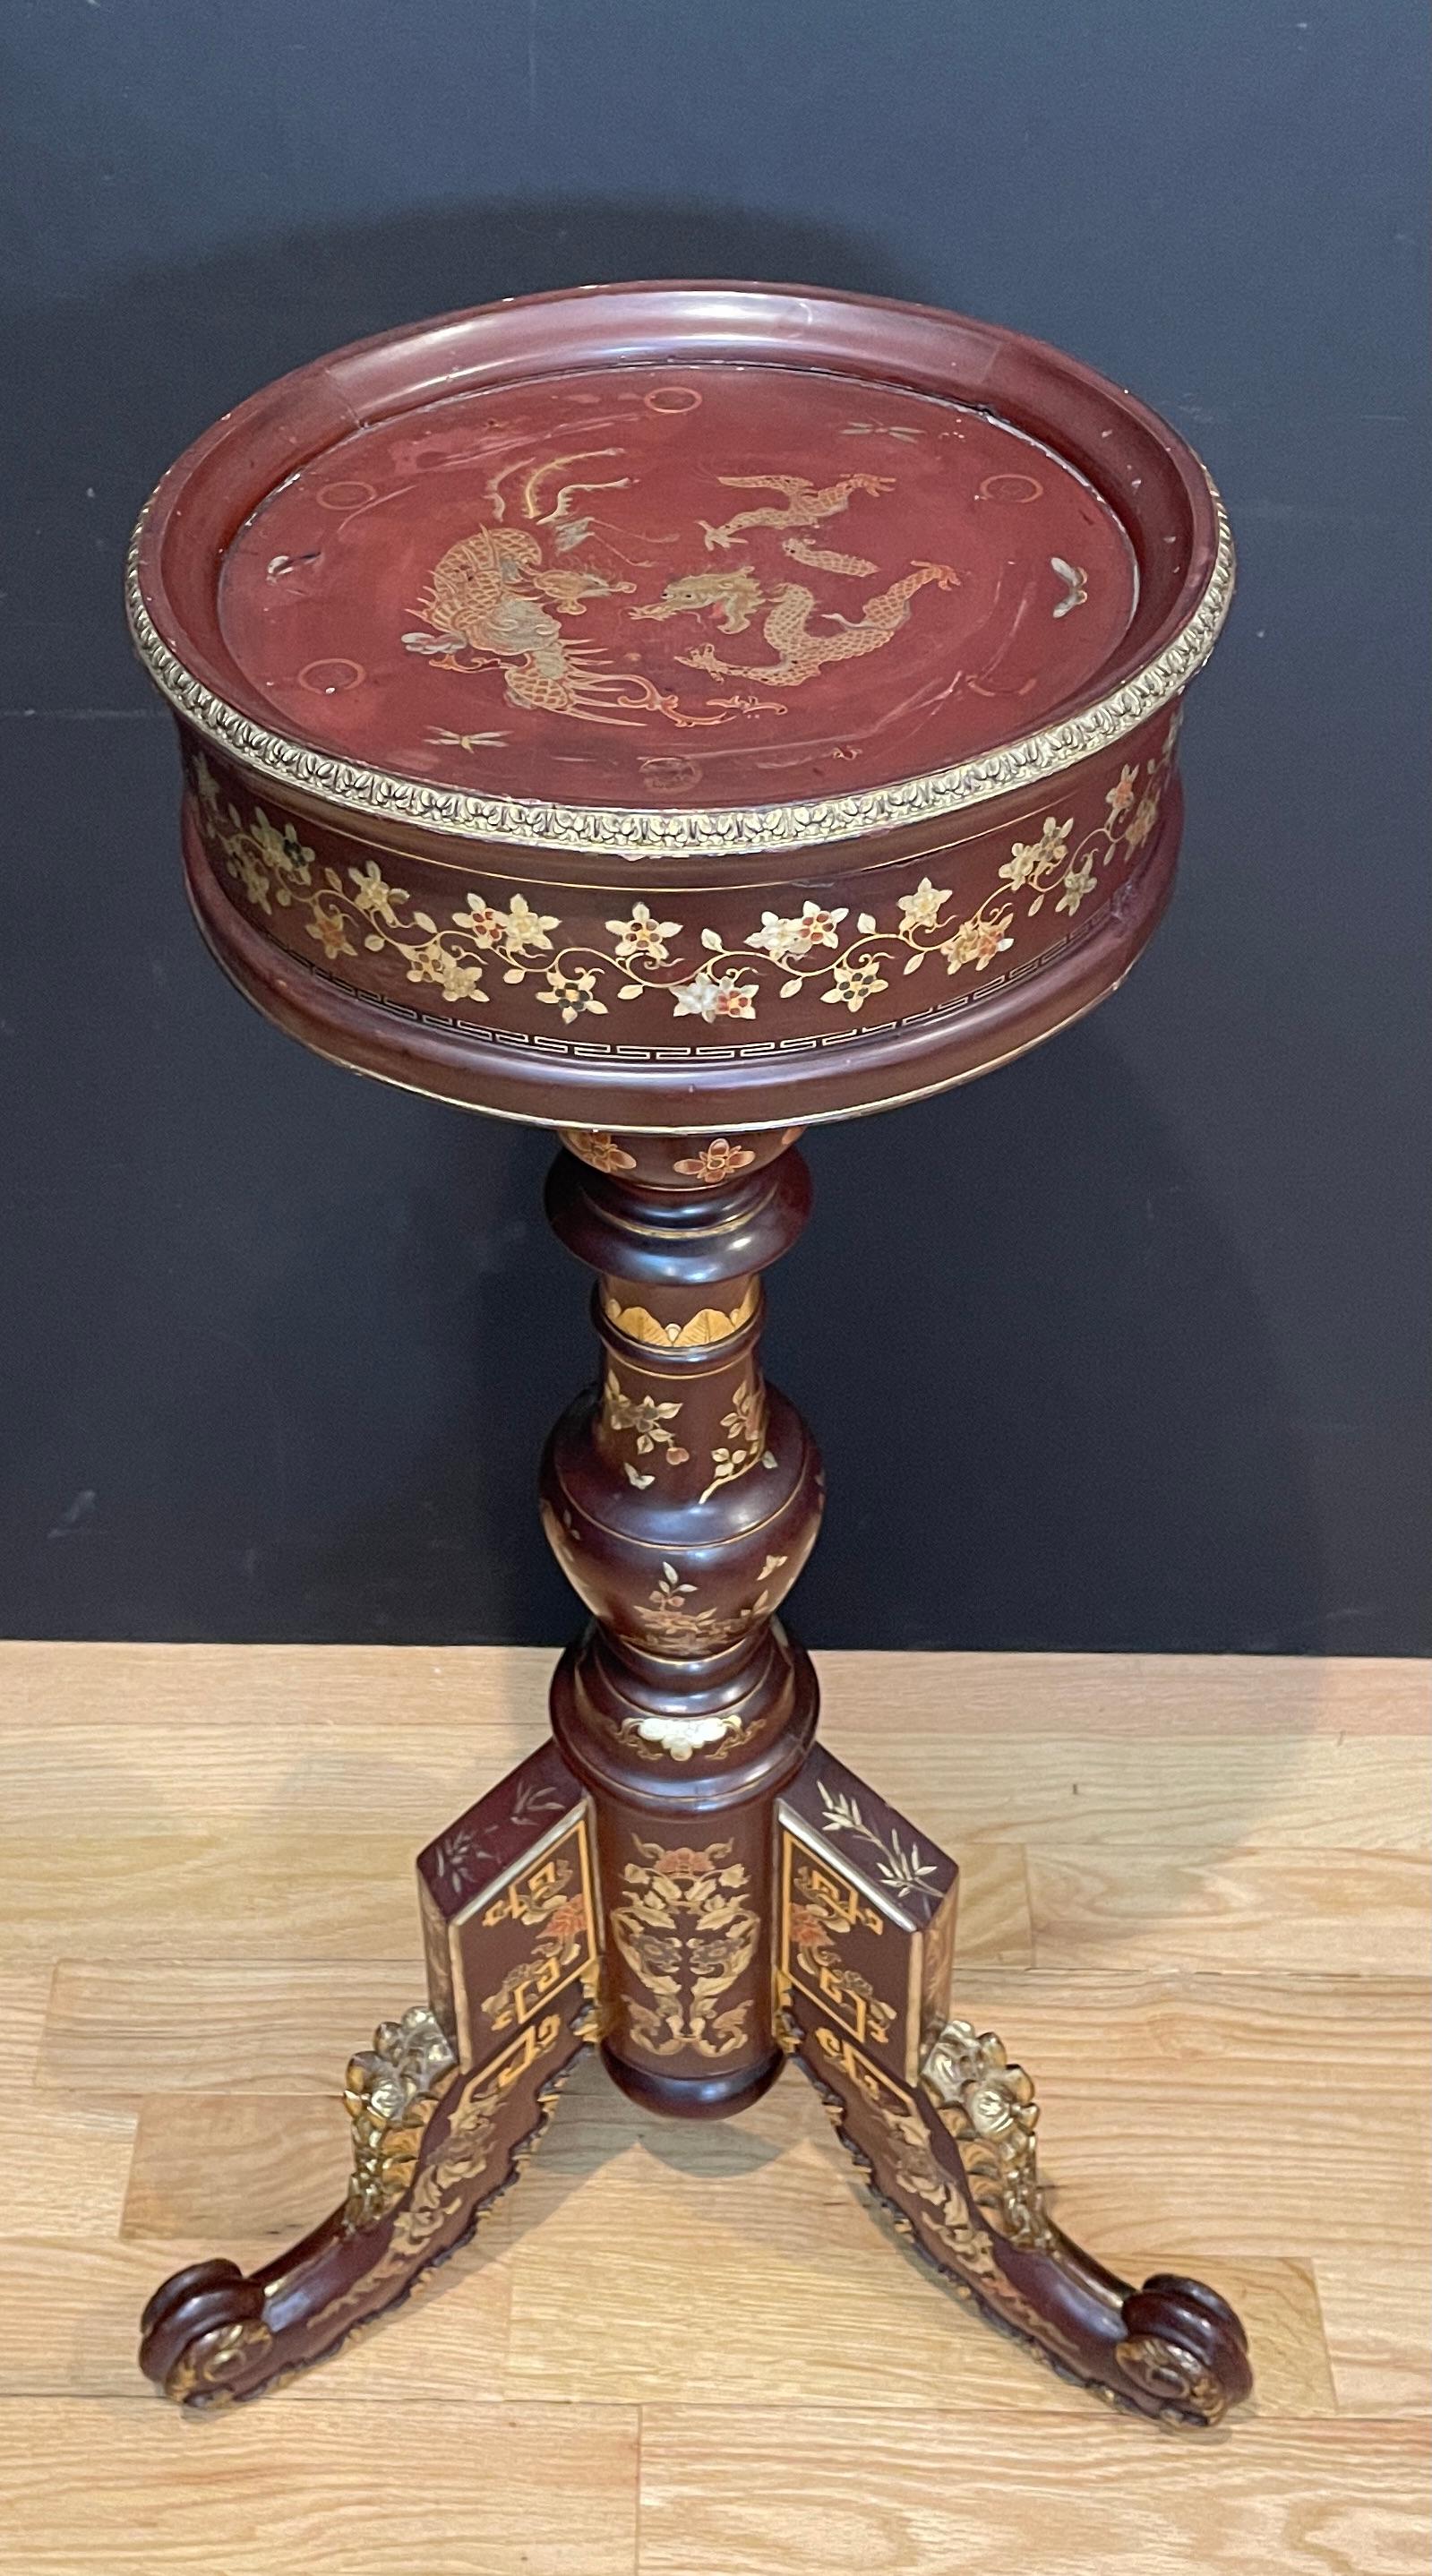 Japanese style French 19th century carved and red painted wood pedestal with gilt and silver gilt embellishments. Deep red-brown lacquer finish. Gilt dragons and floral decorations.
Top surface 11.5